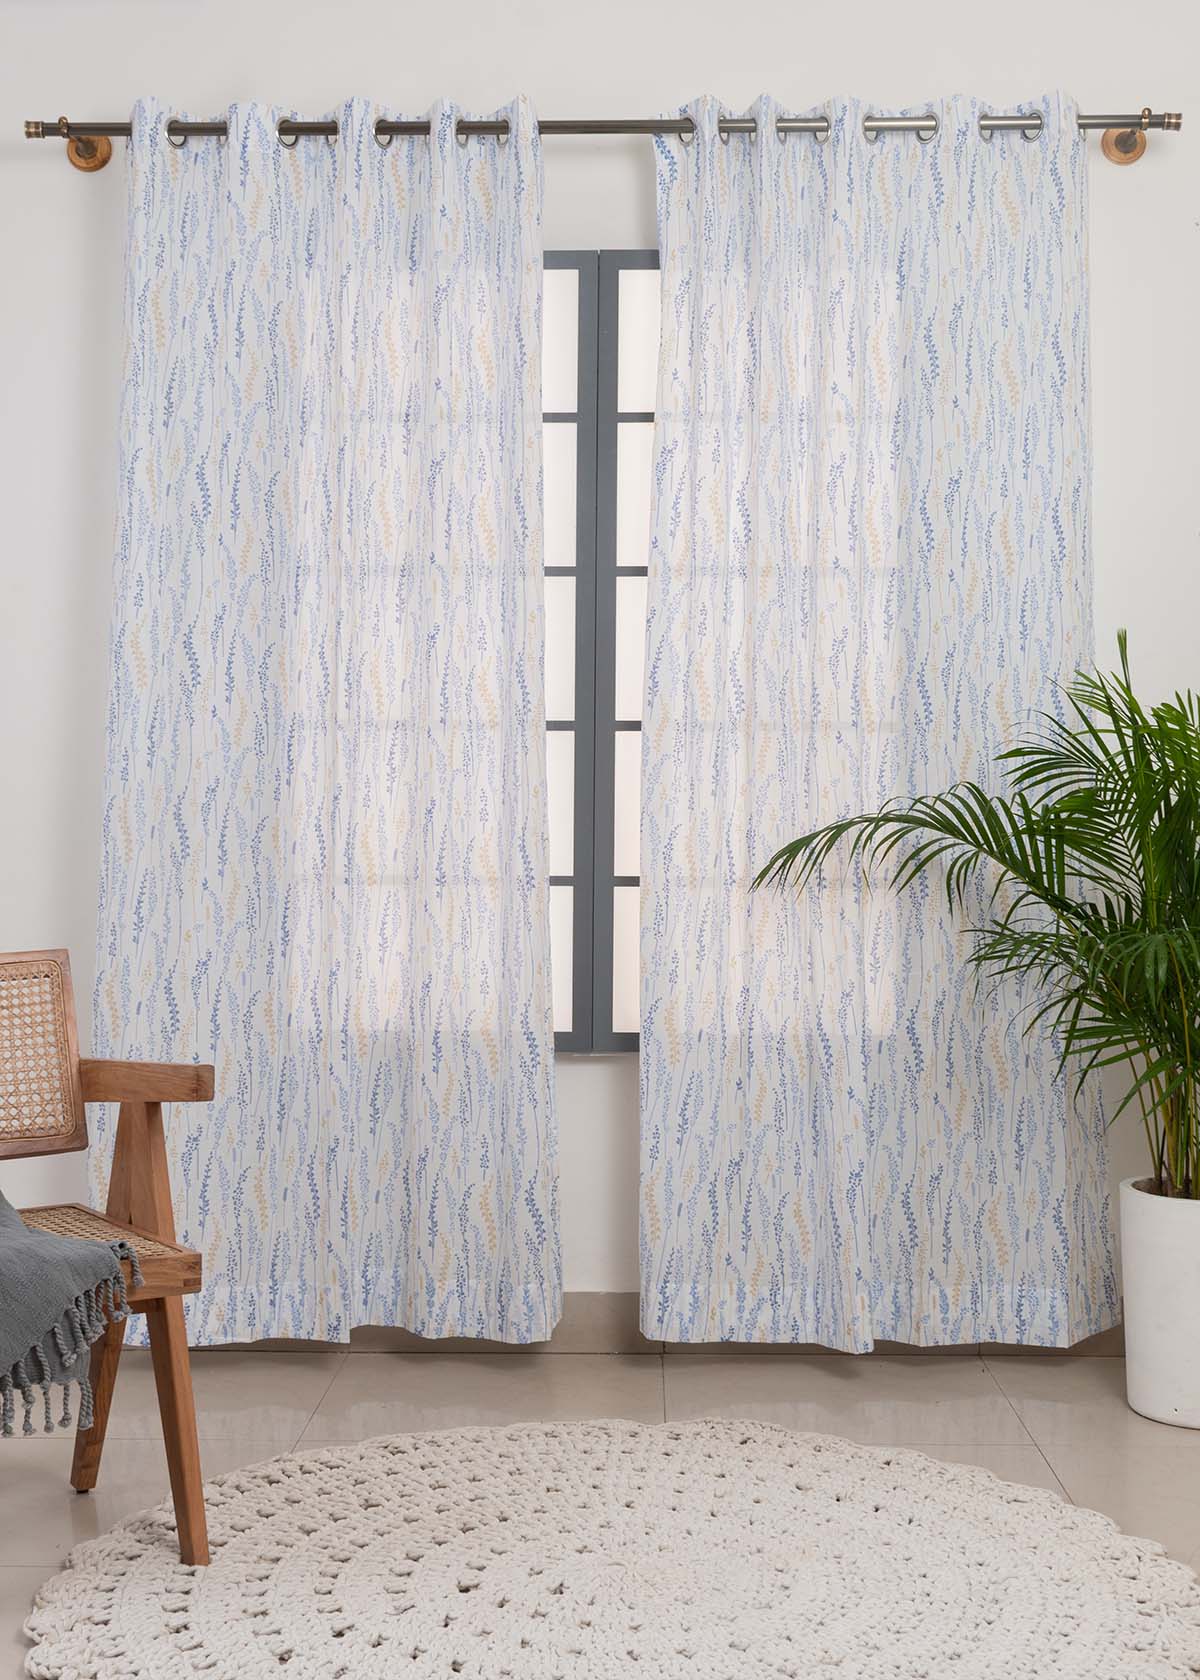 Grass fileds  100% cotton sheer floral curtain for living room -  Light filtering - Blue - Pack of 1